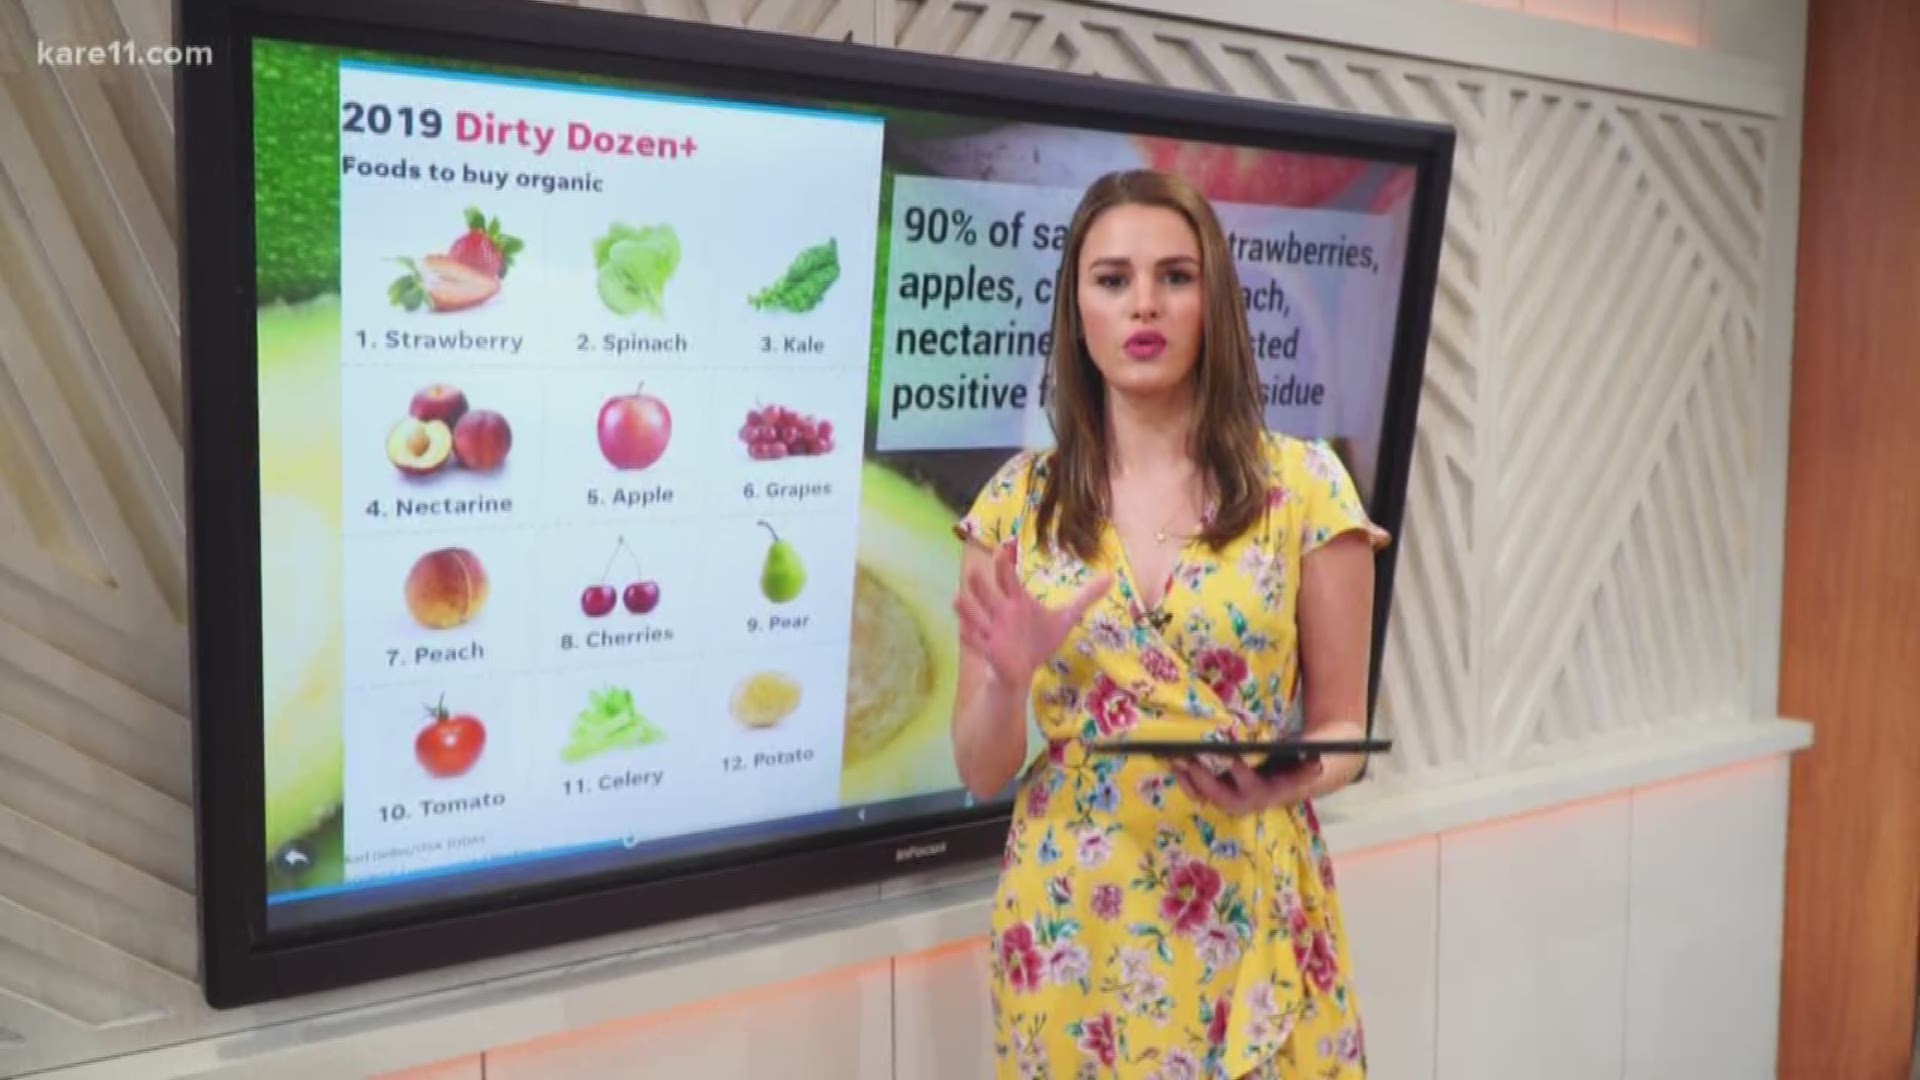 We compare the "clean fifteen" and the "dirty dozen" - and tell you which produce to buy organic. https://kare11.tv/2HxdWQe